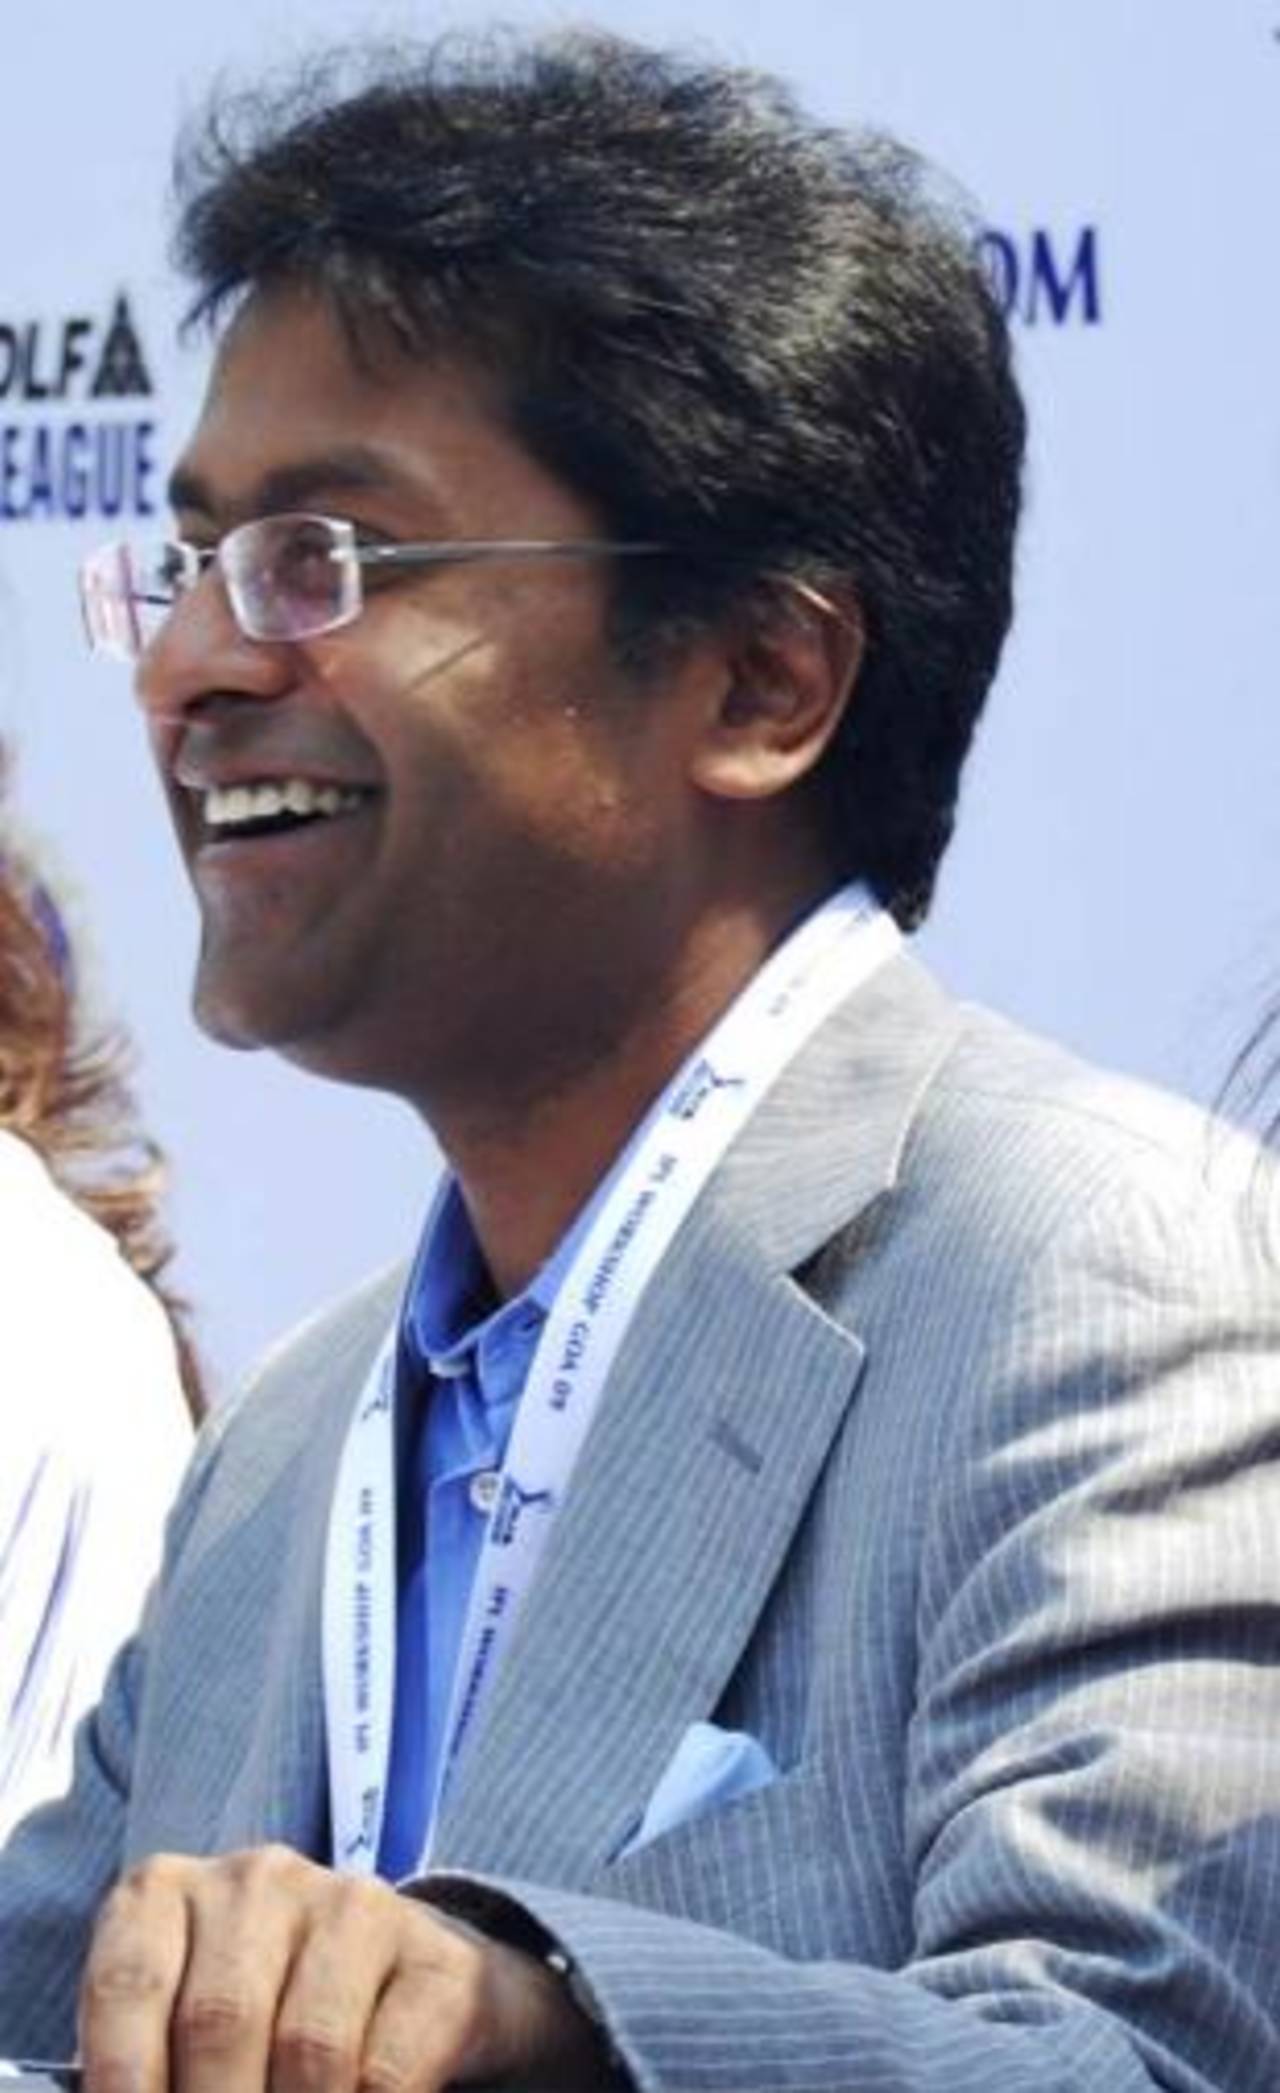 Lalit Modi: "The bidding was extremely competitive and I hope they [the bidders] make good business."&nbsp;&nbsp;&bull;&nbsp;&nbsp;Associated Press